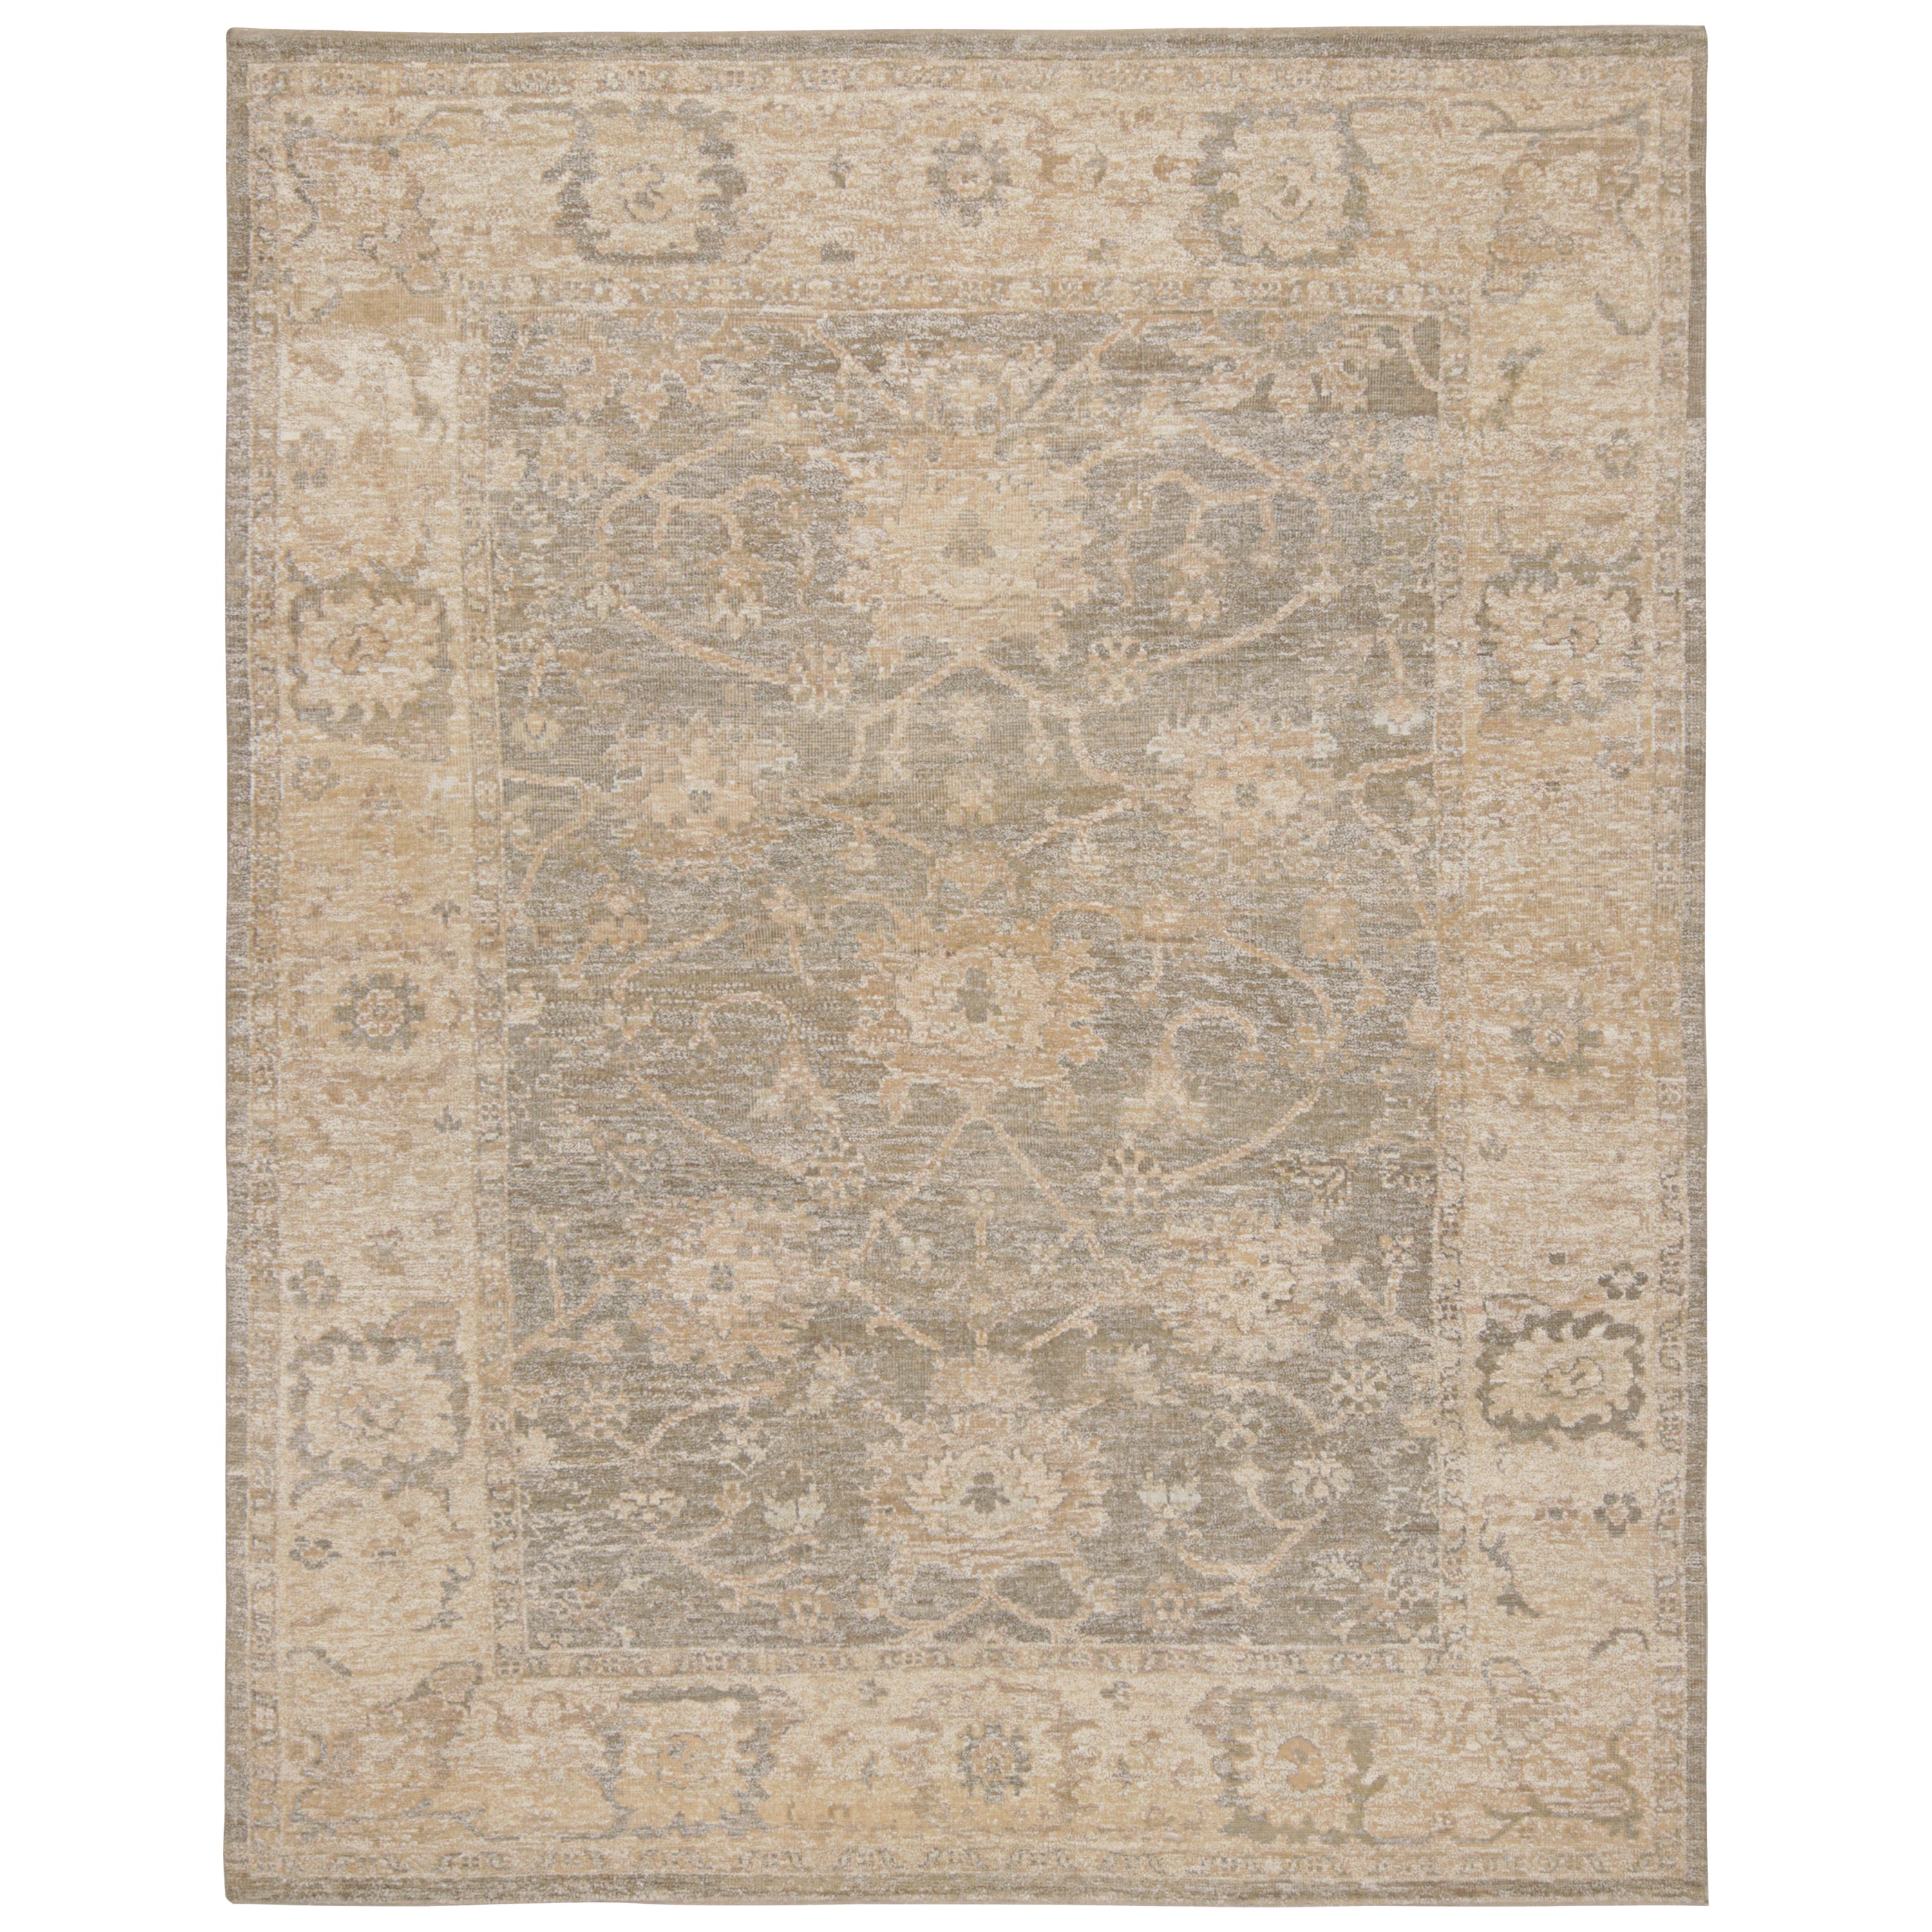 Rug & Kilim’s Oushak Style Rug in Gray and Beige-Brown Floral Patterns For Sale